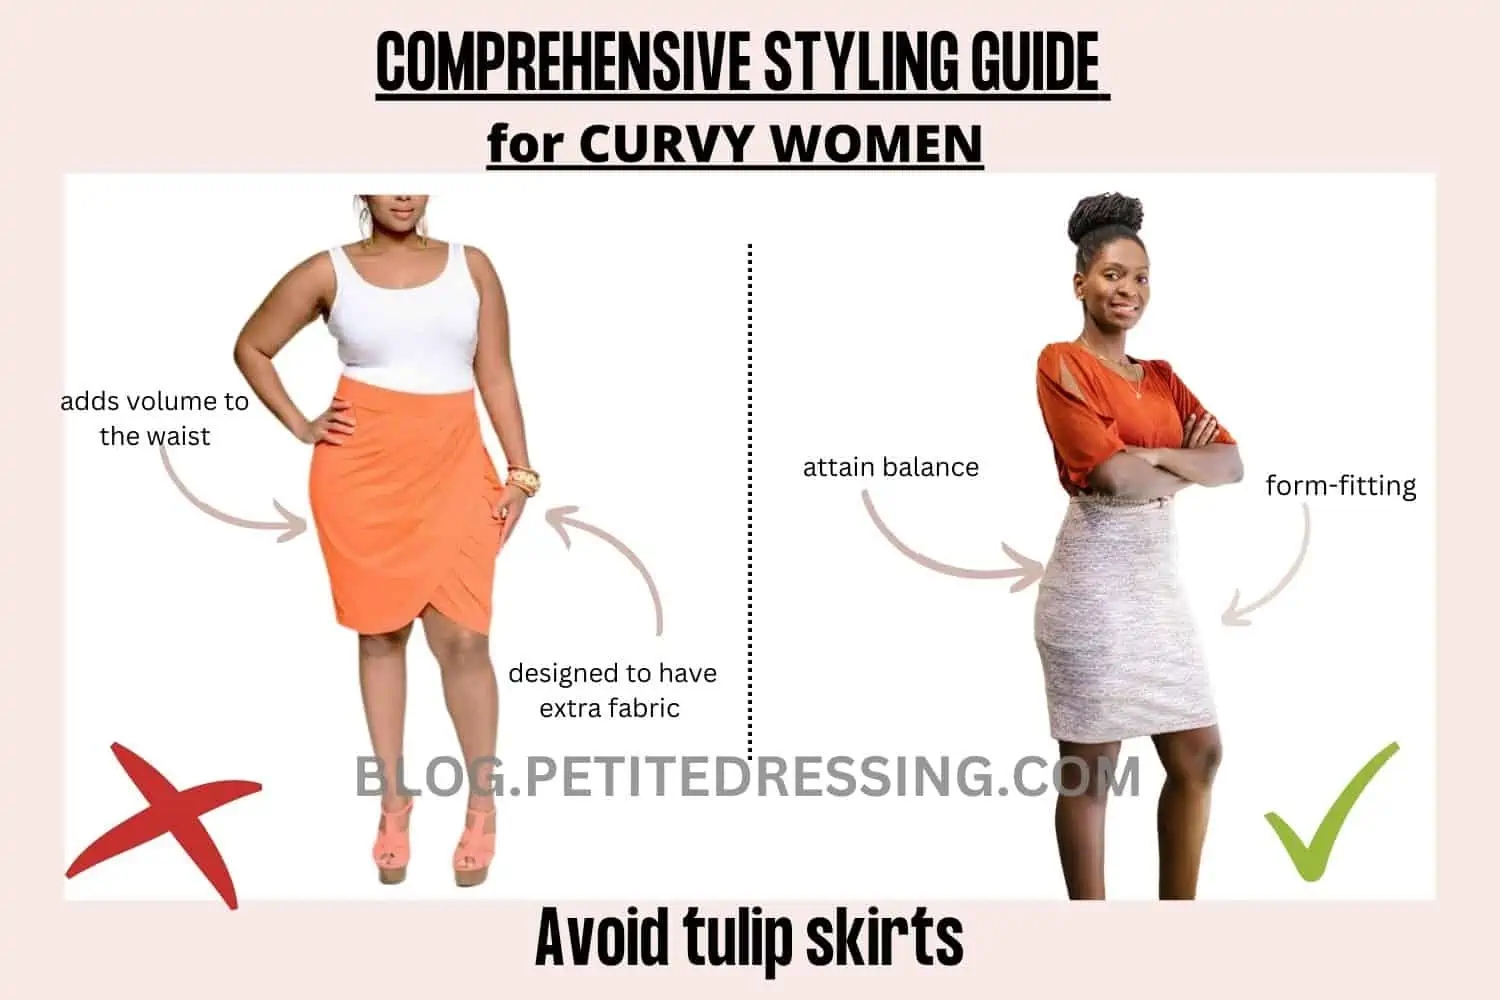 The Comprehensive Styling Guide for Curvy Women - Petite Dressing